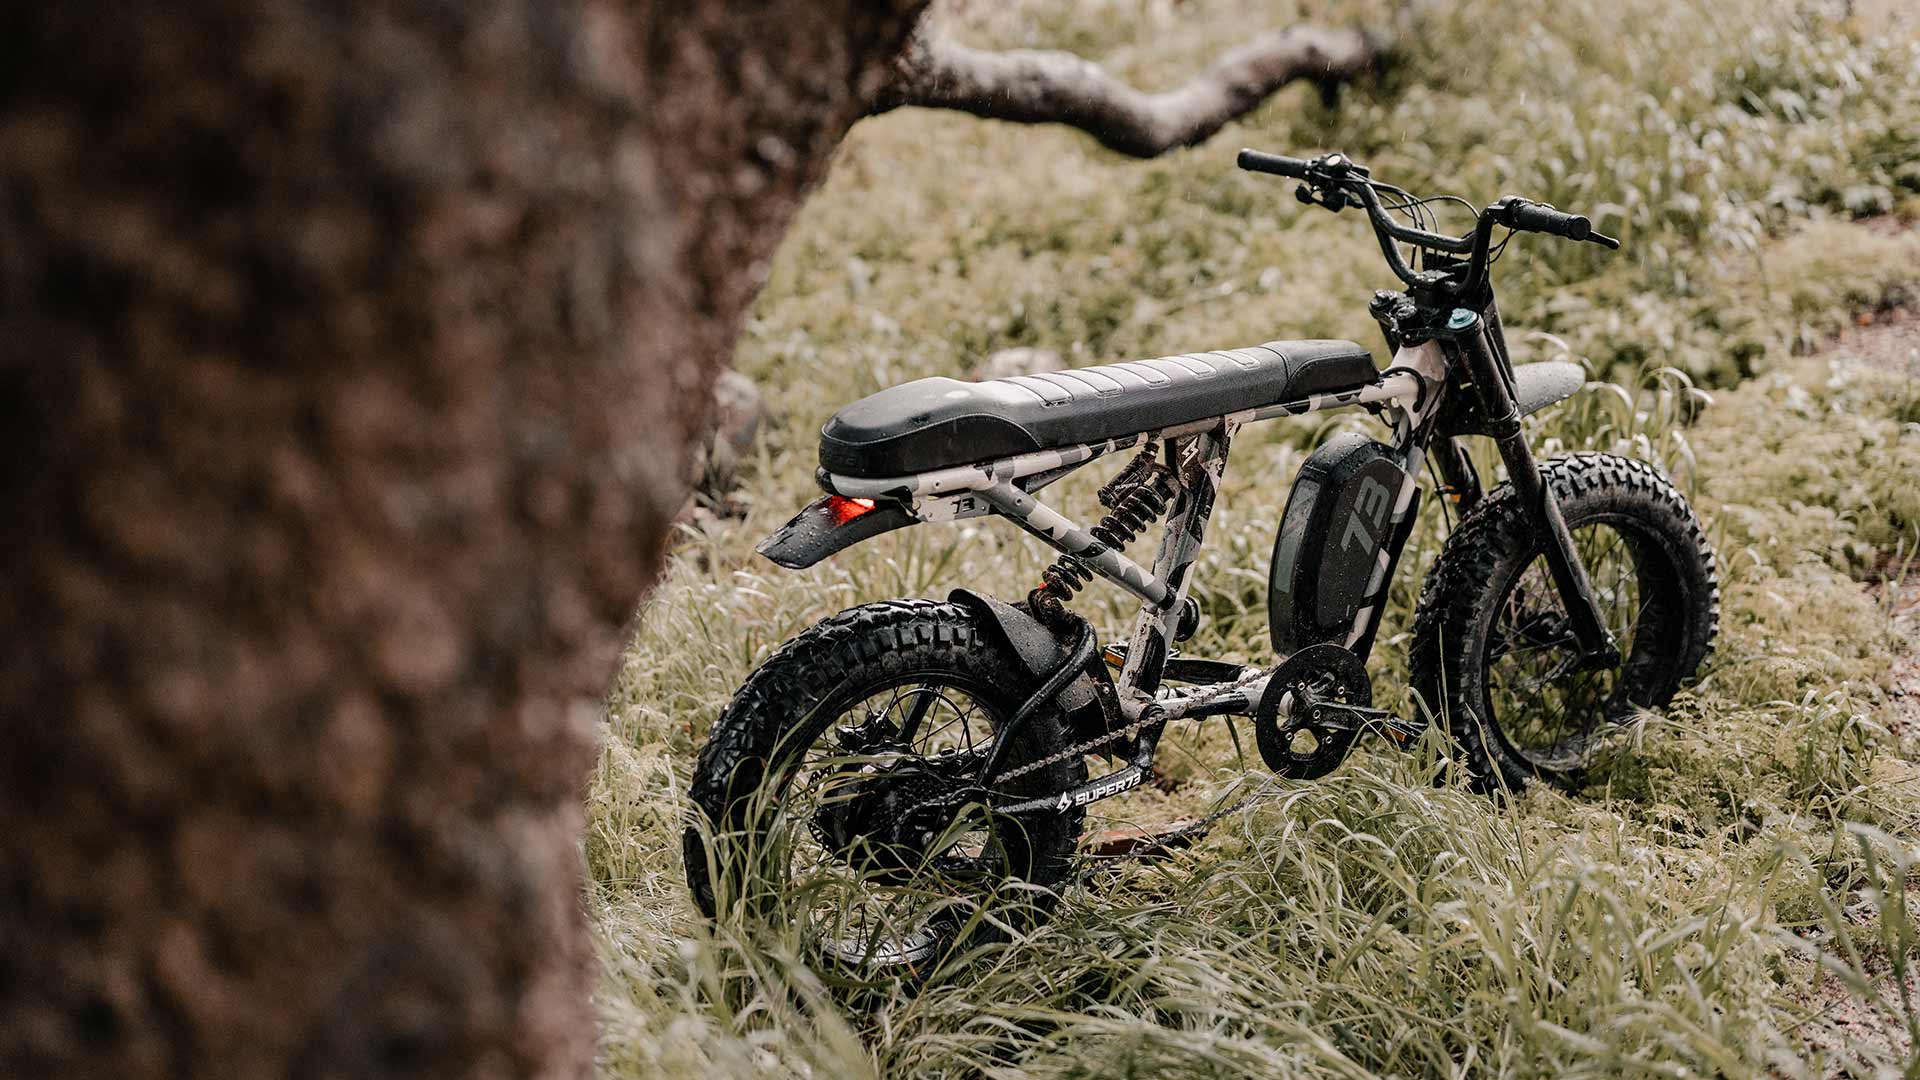 The Super73-R Adventure Series ebike displayed on long tall grass